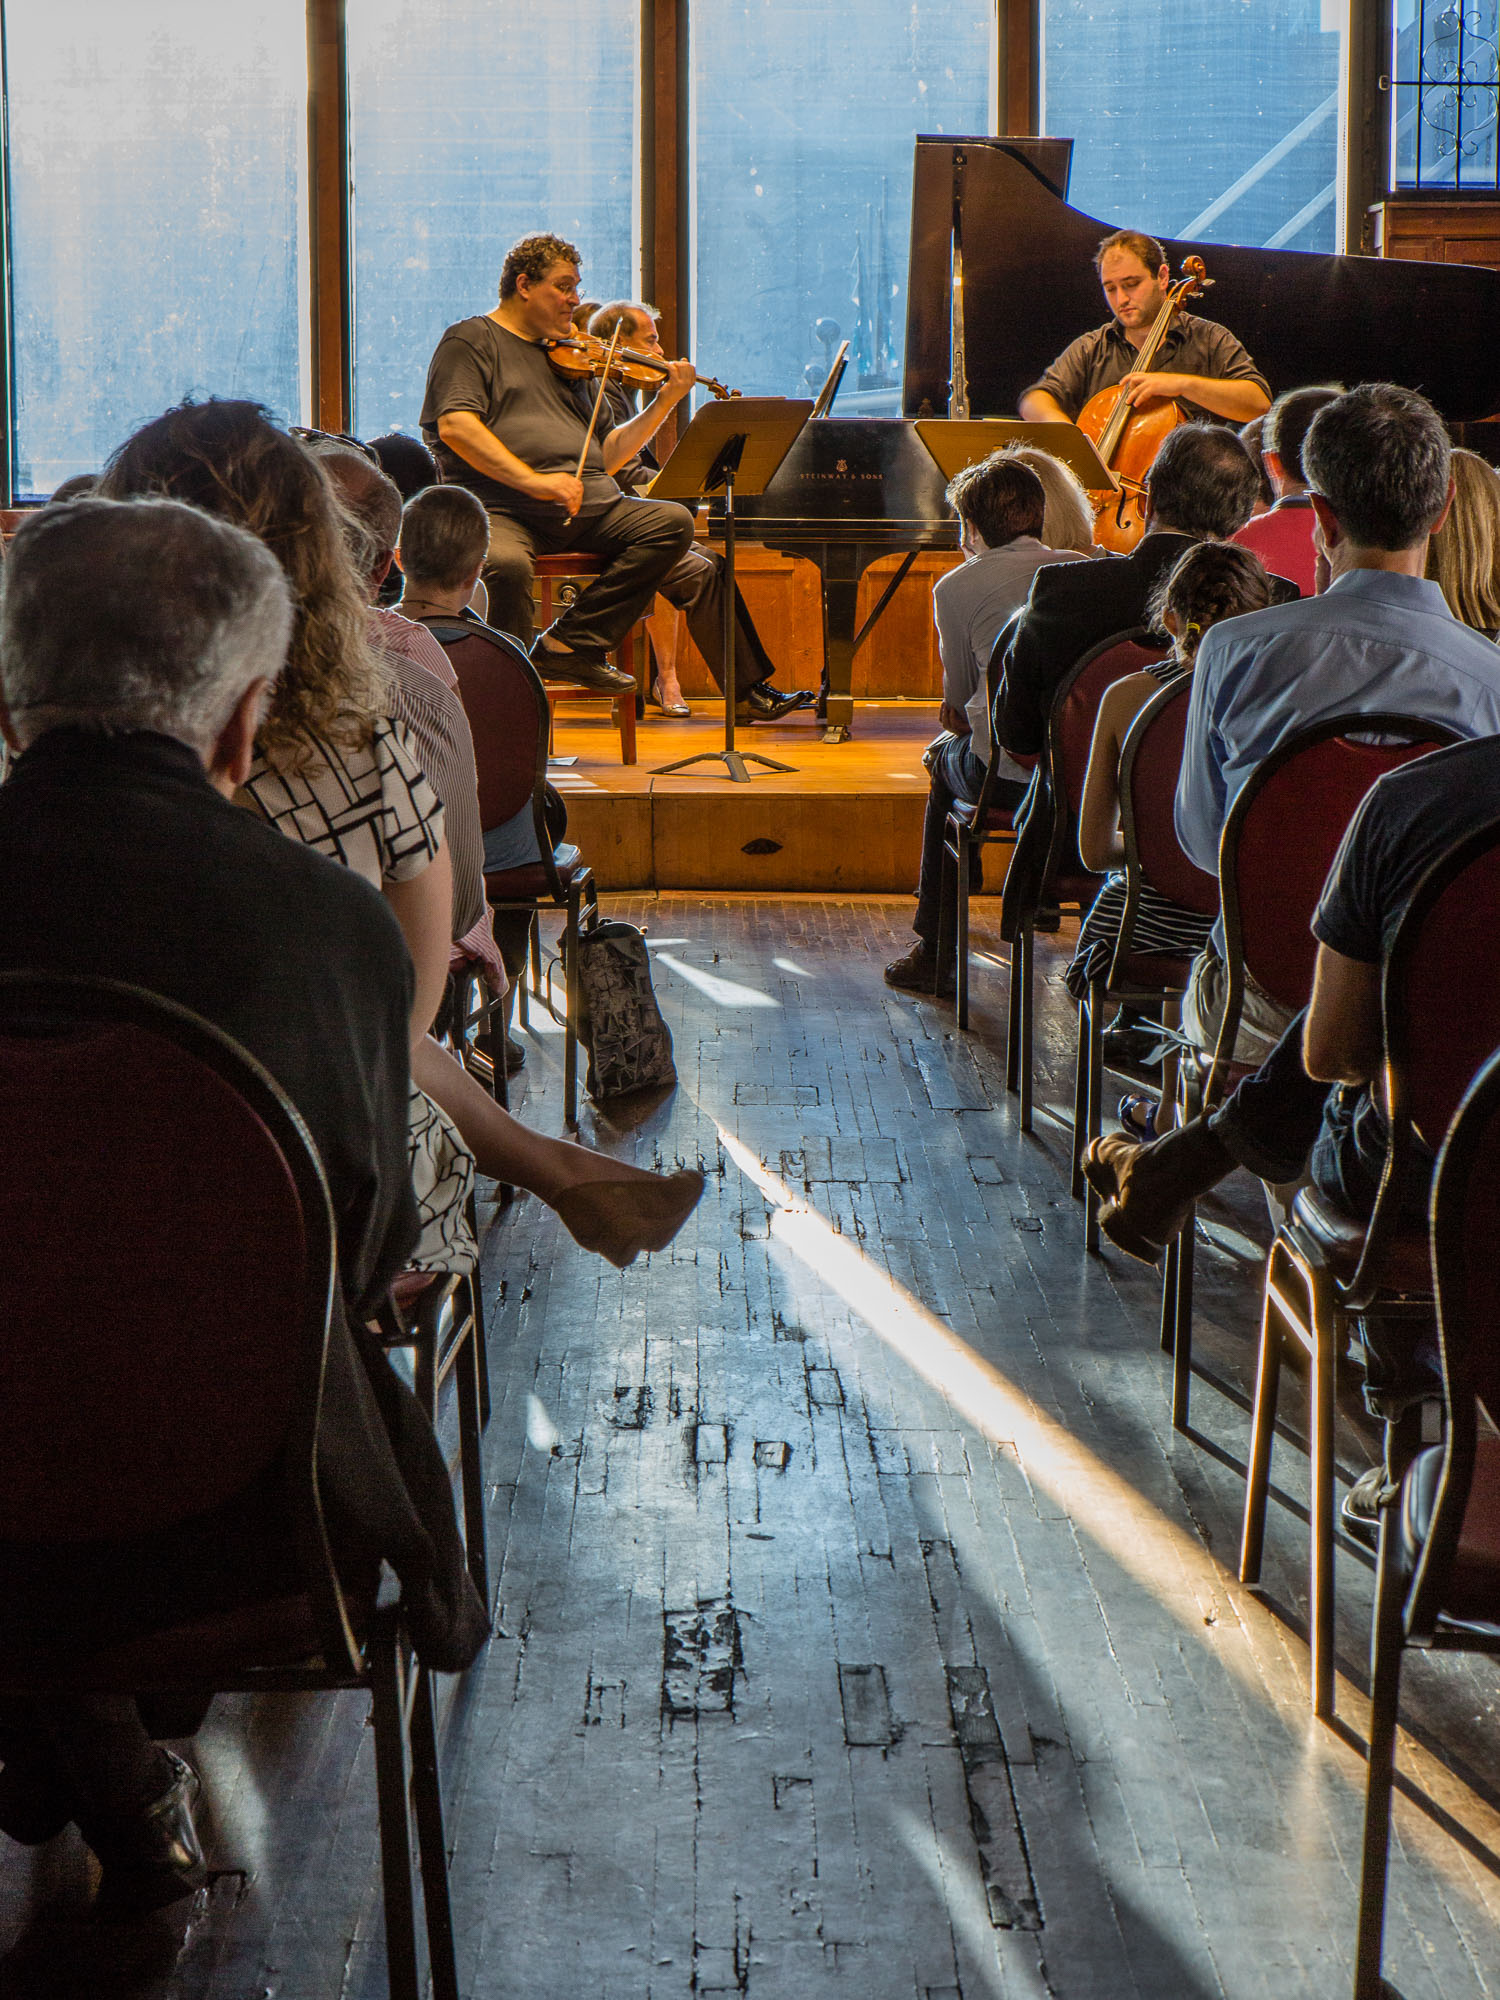 A classical music concert at Bargemusic, a floating concert hall on Brooklyn's waterfront.